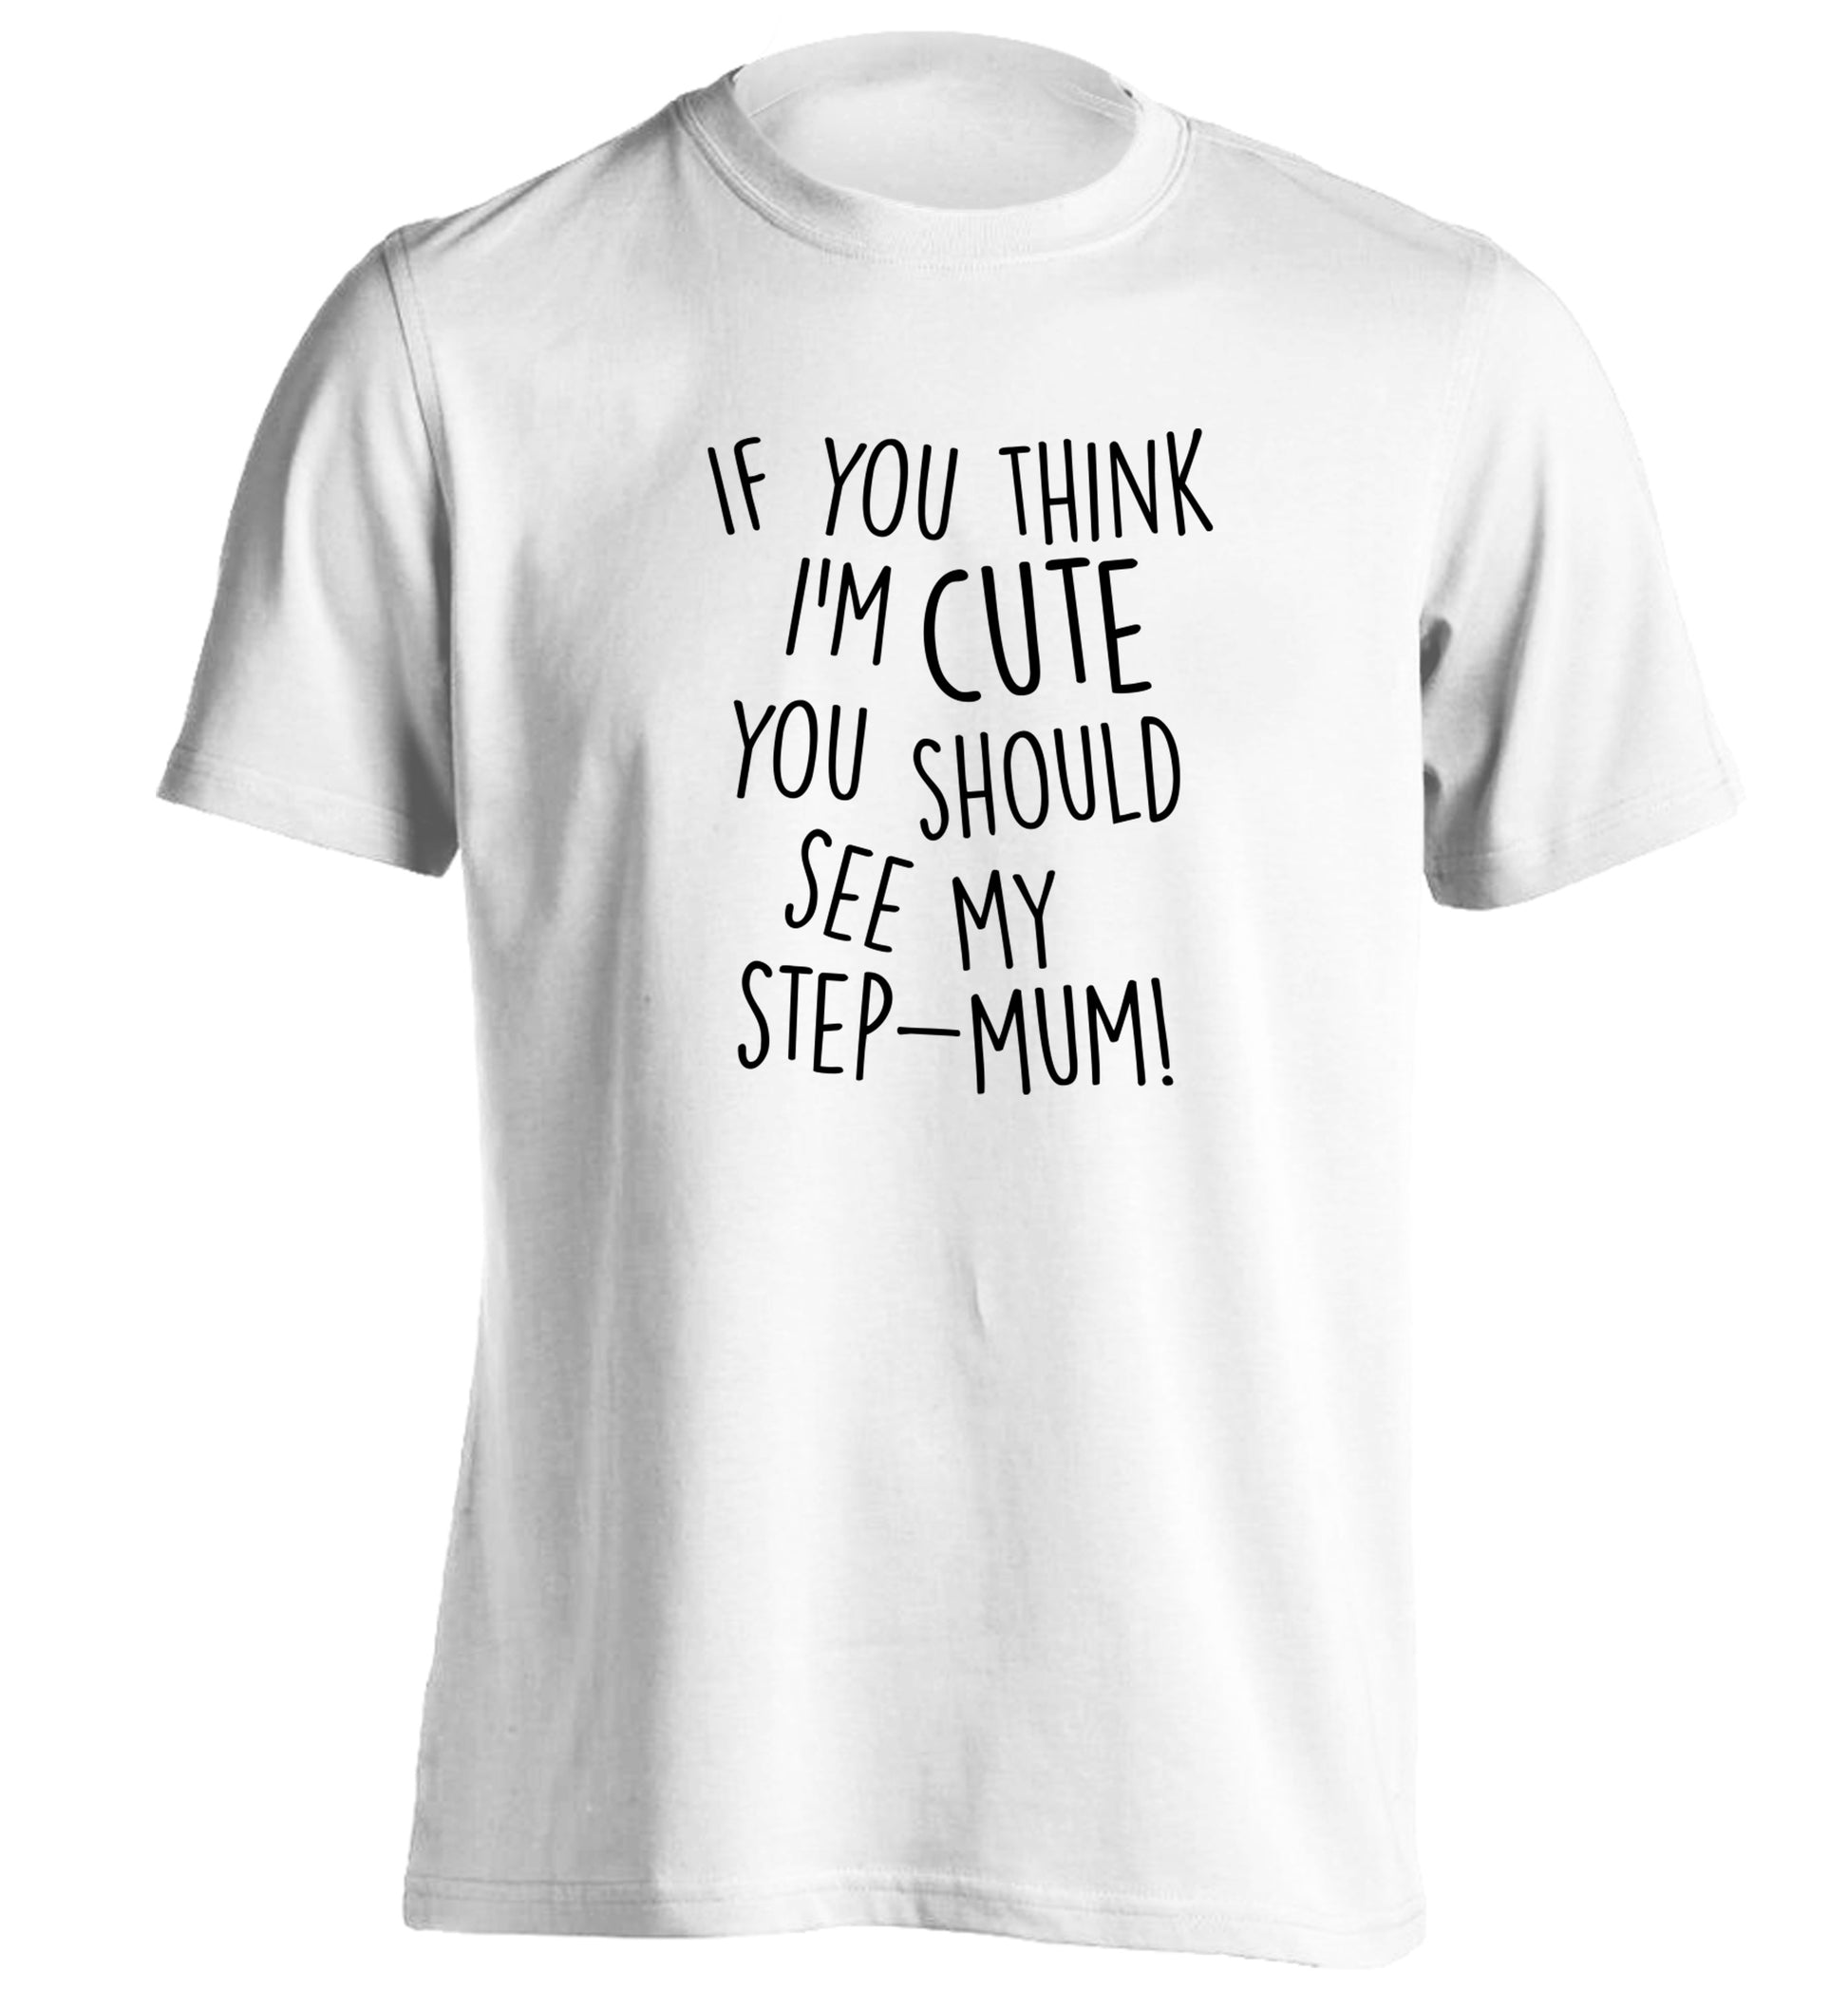 If you think I'm cute you should see my step-mum adults unisex white Tshirt 2XL